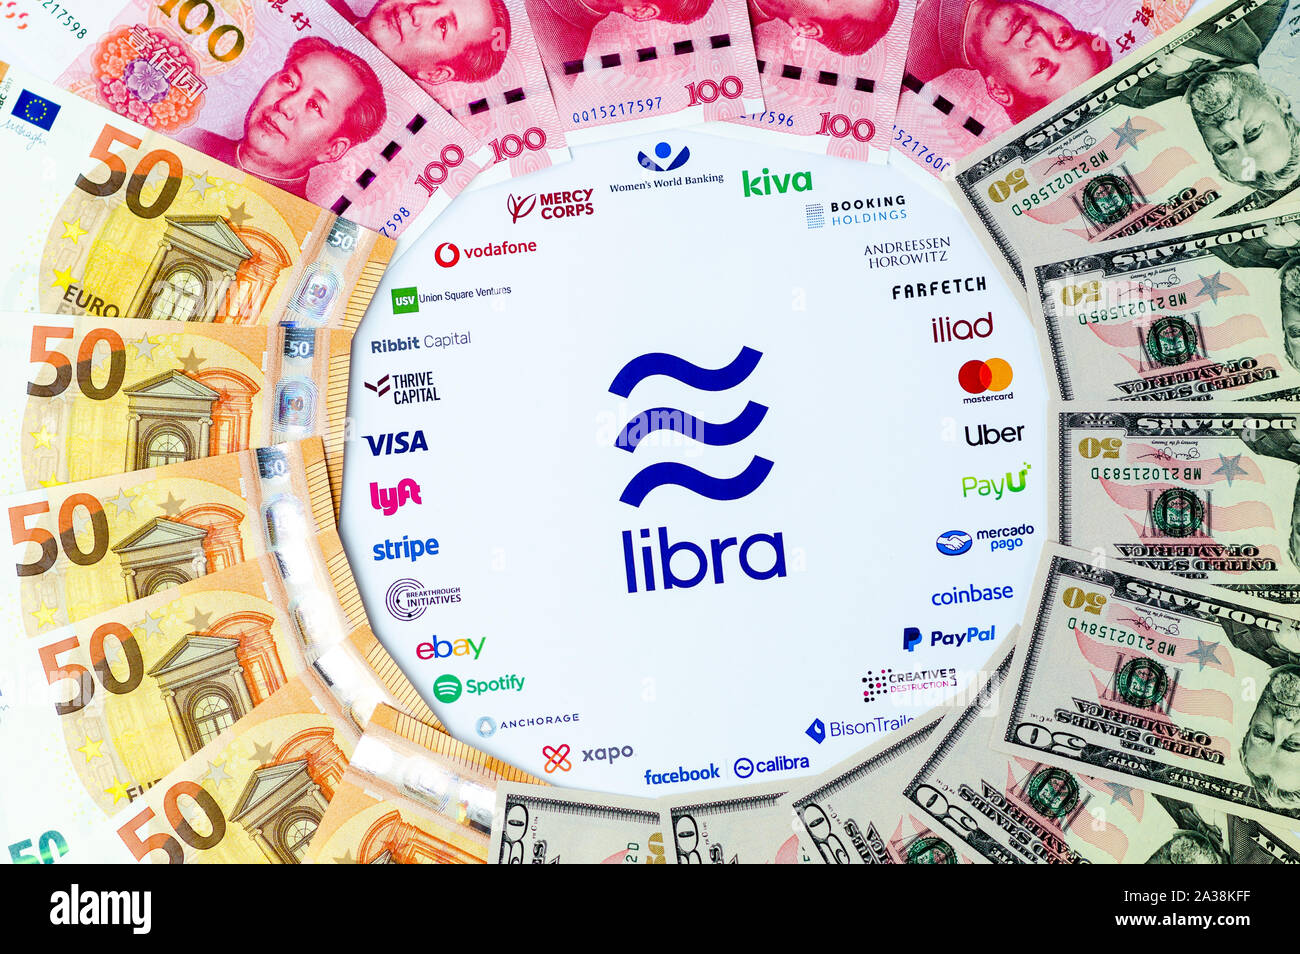 Libra Association logo on paper brochure and USD, CNY, EUR banknotes. Illustrative for Facebook plan to create global currency called Libra. Stock Photo